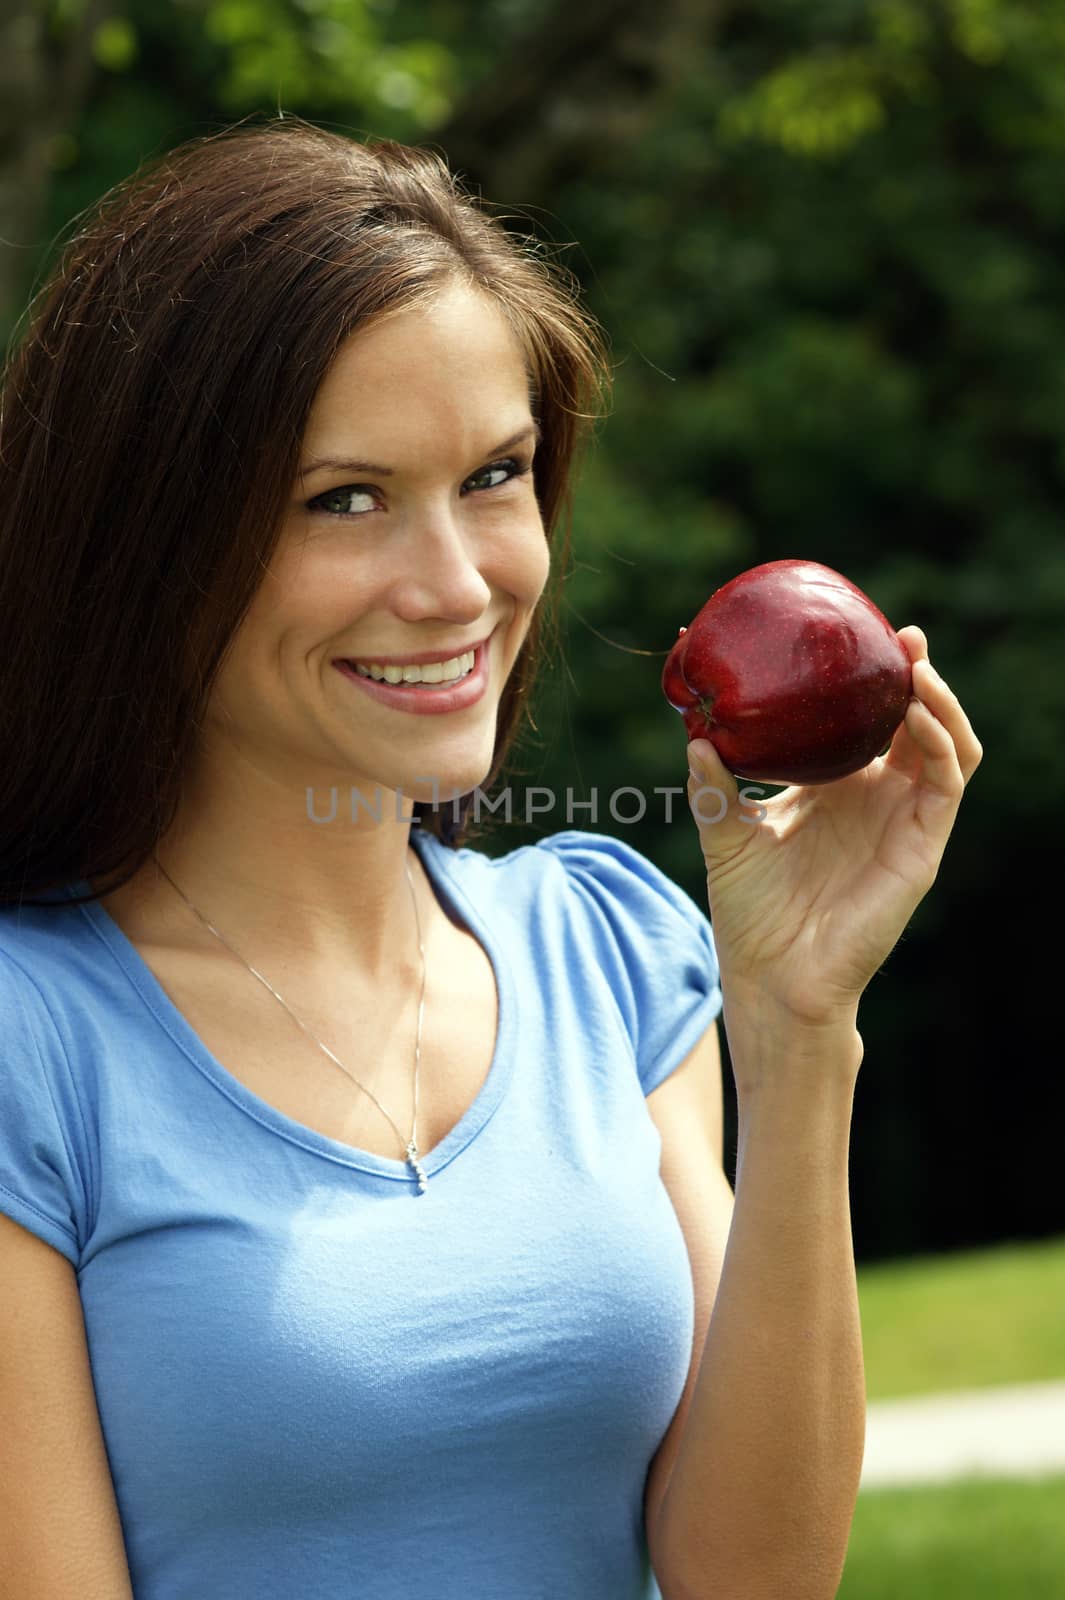 Attractive Woman Smiling in Park with Red Delicious Apple  by ChrisBoswell